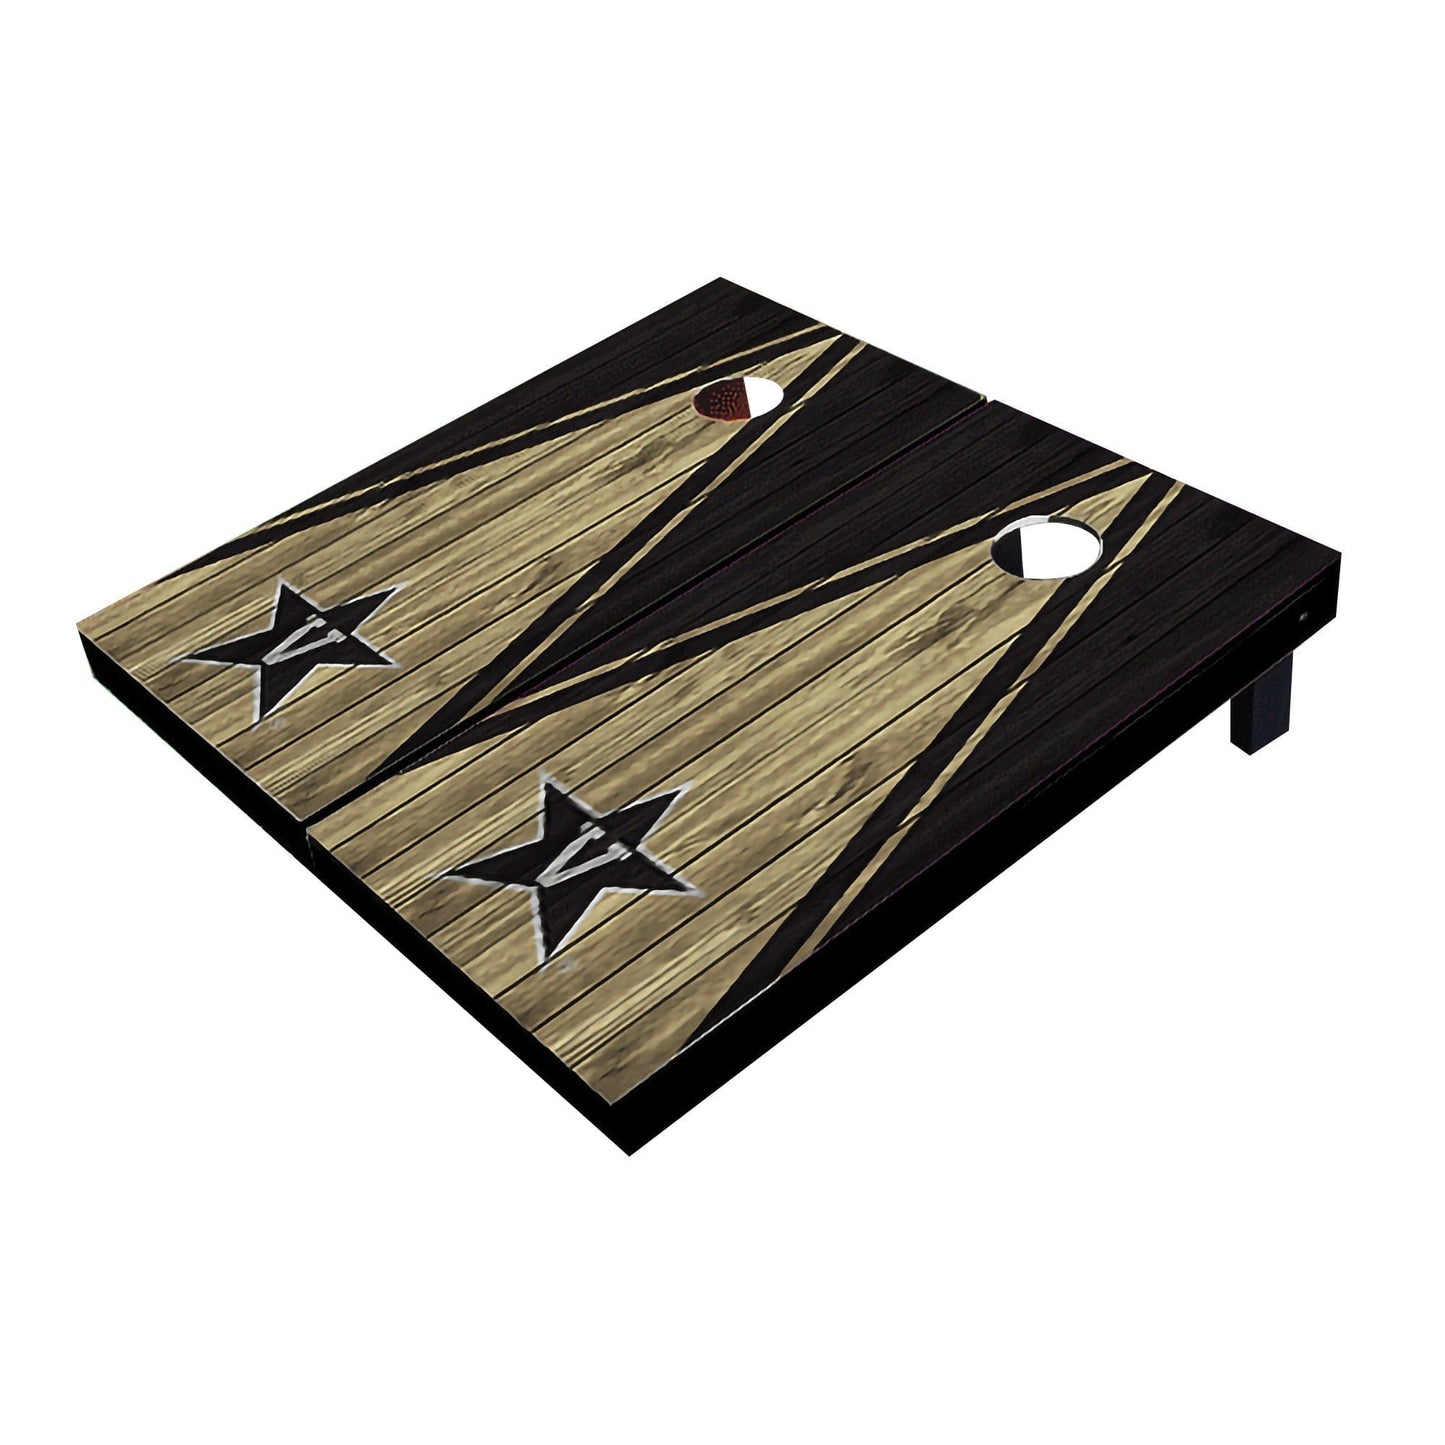 Vanderbilt Commodores Gold And Black Matching Triangle All-Weather Cornhole Boards